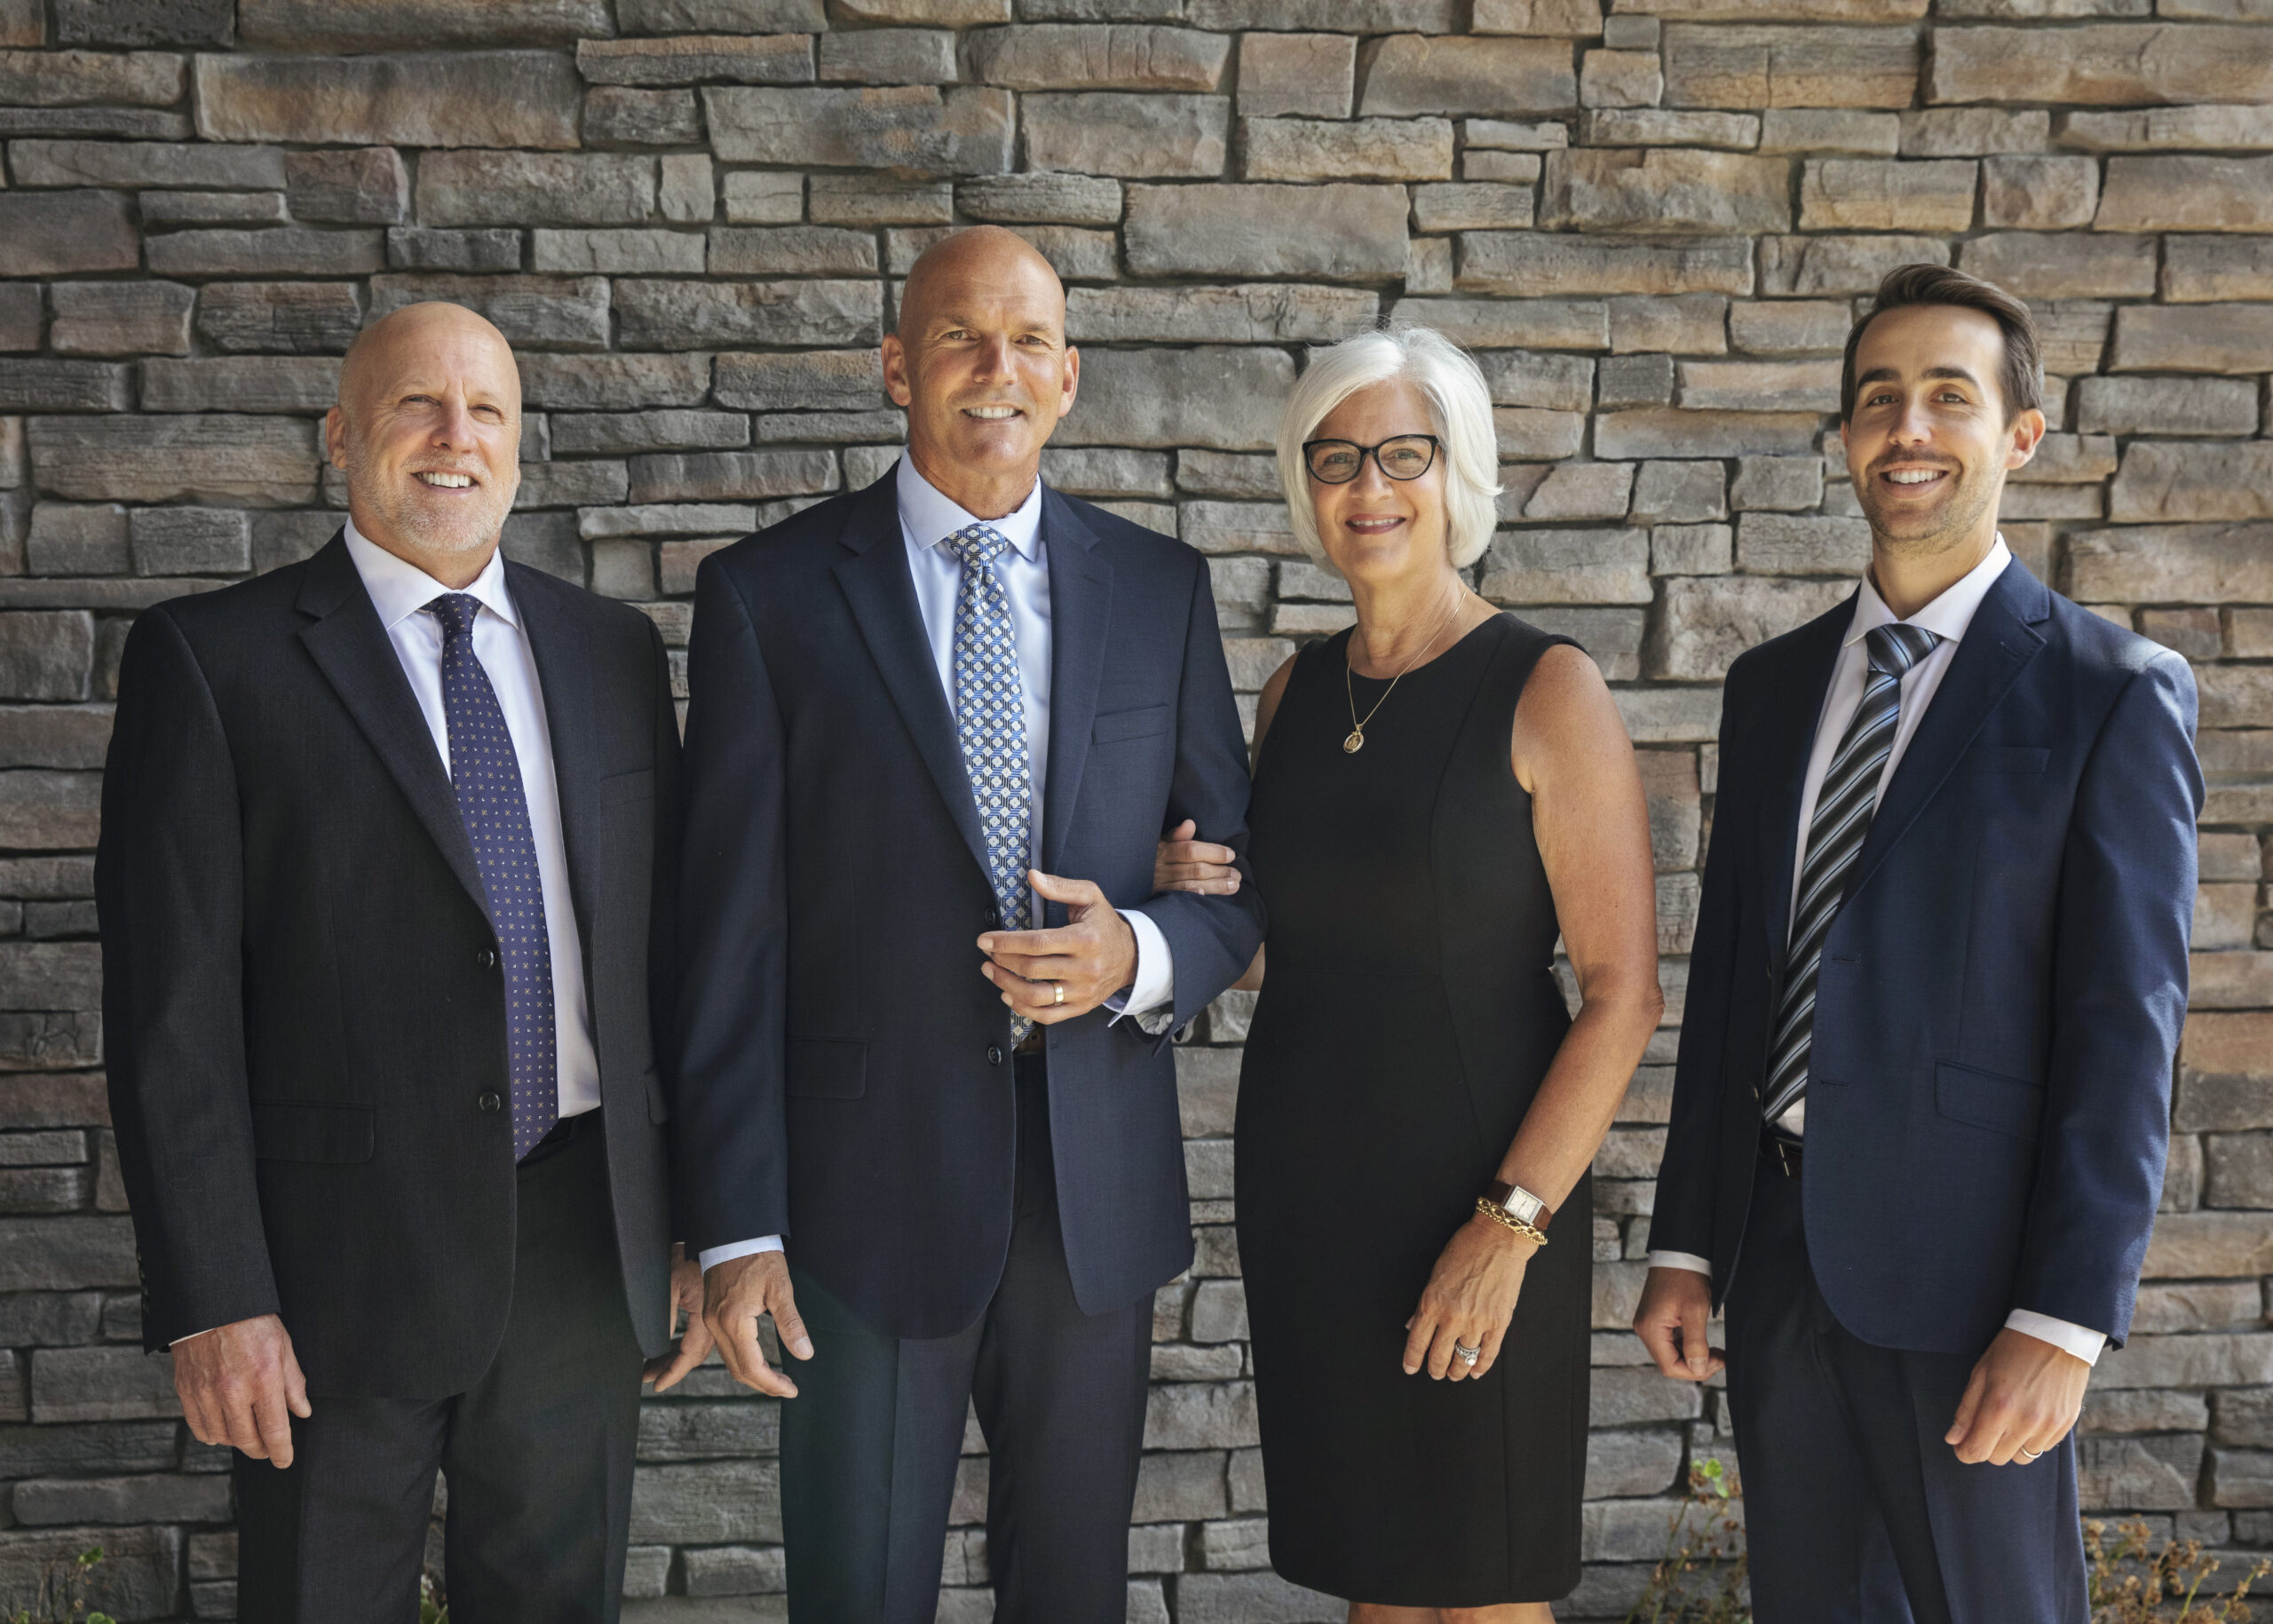 The principle partners of Berriz Law Group, picture left to right are personal injury attorneys Jacob A. O. Stub, Armando Berriz, Catherine Berriz and Austin L. Alfonso.